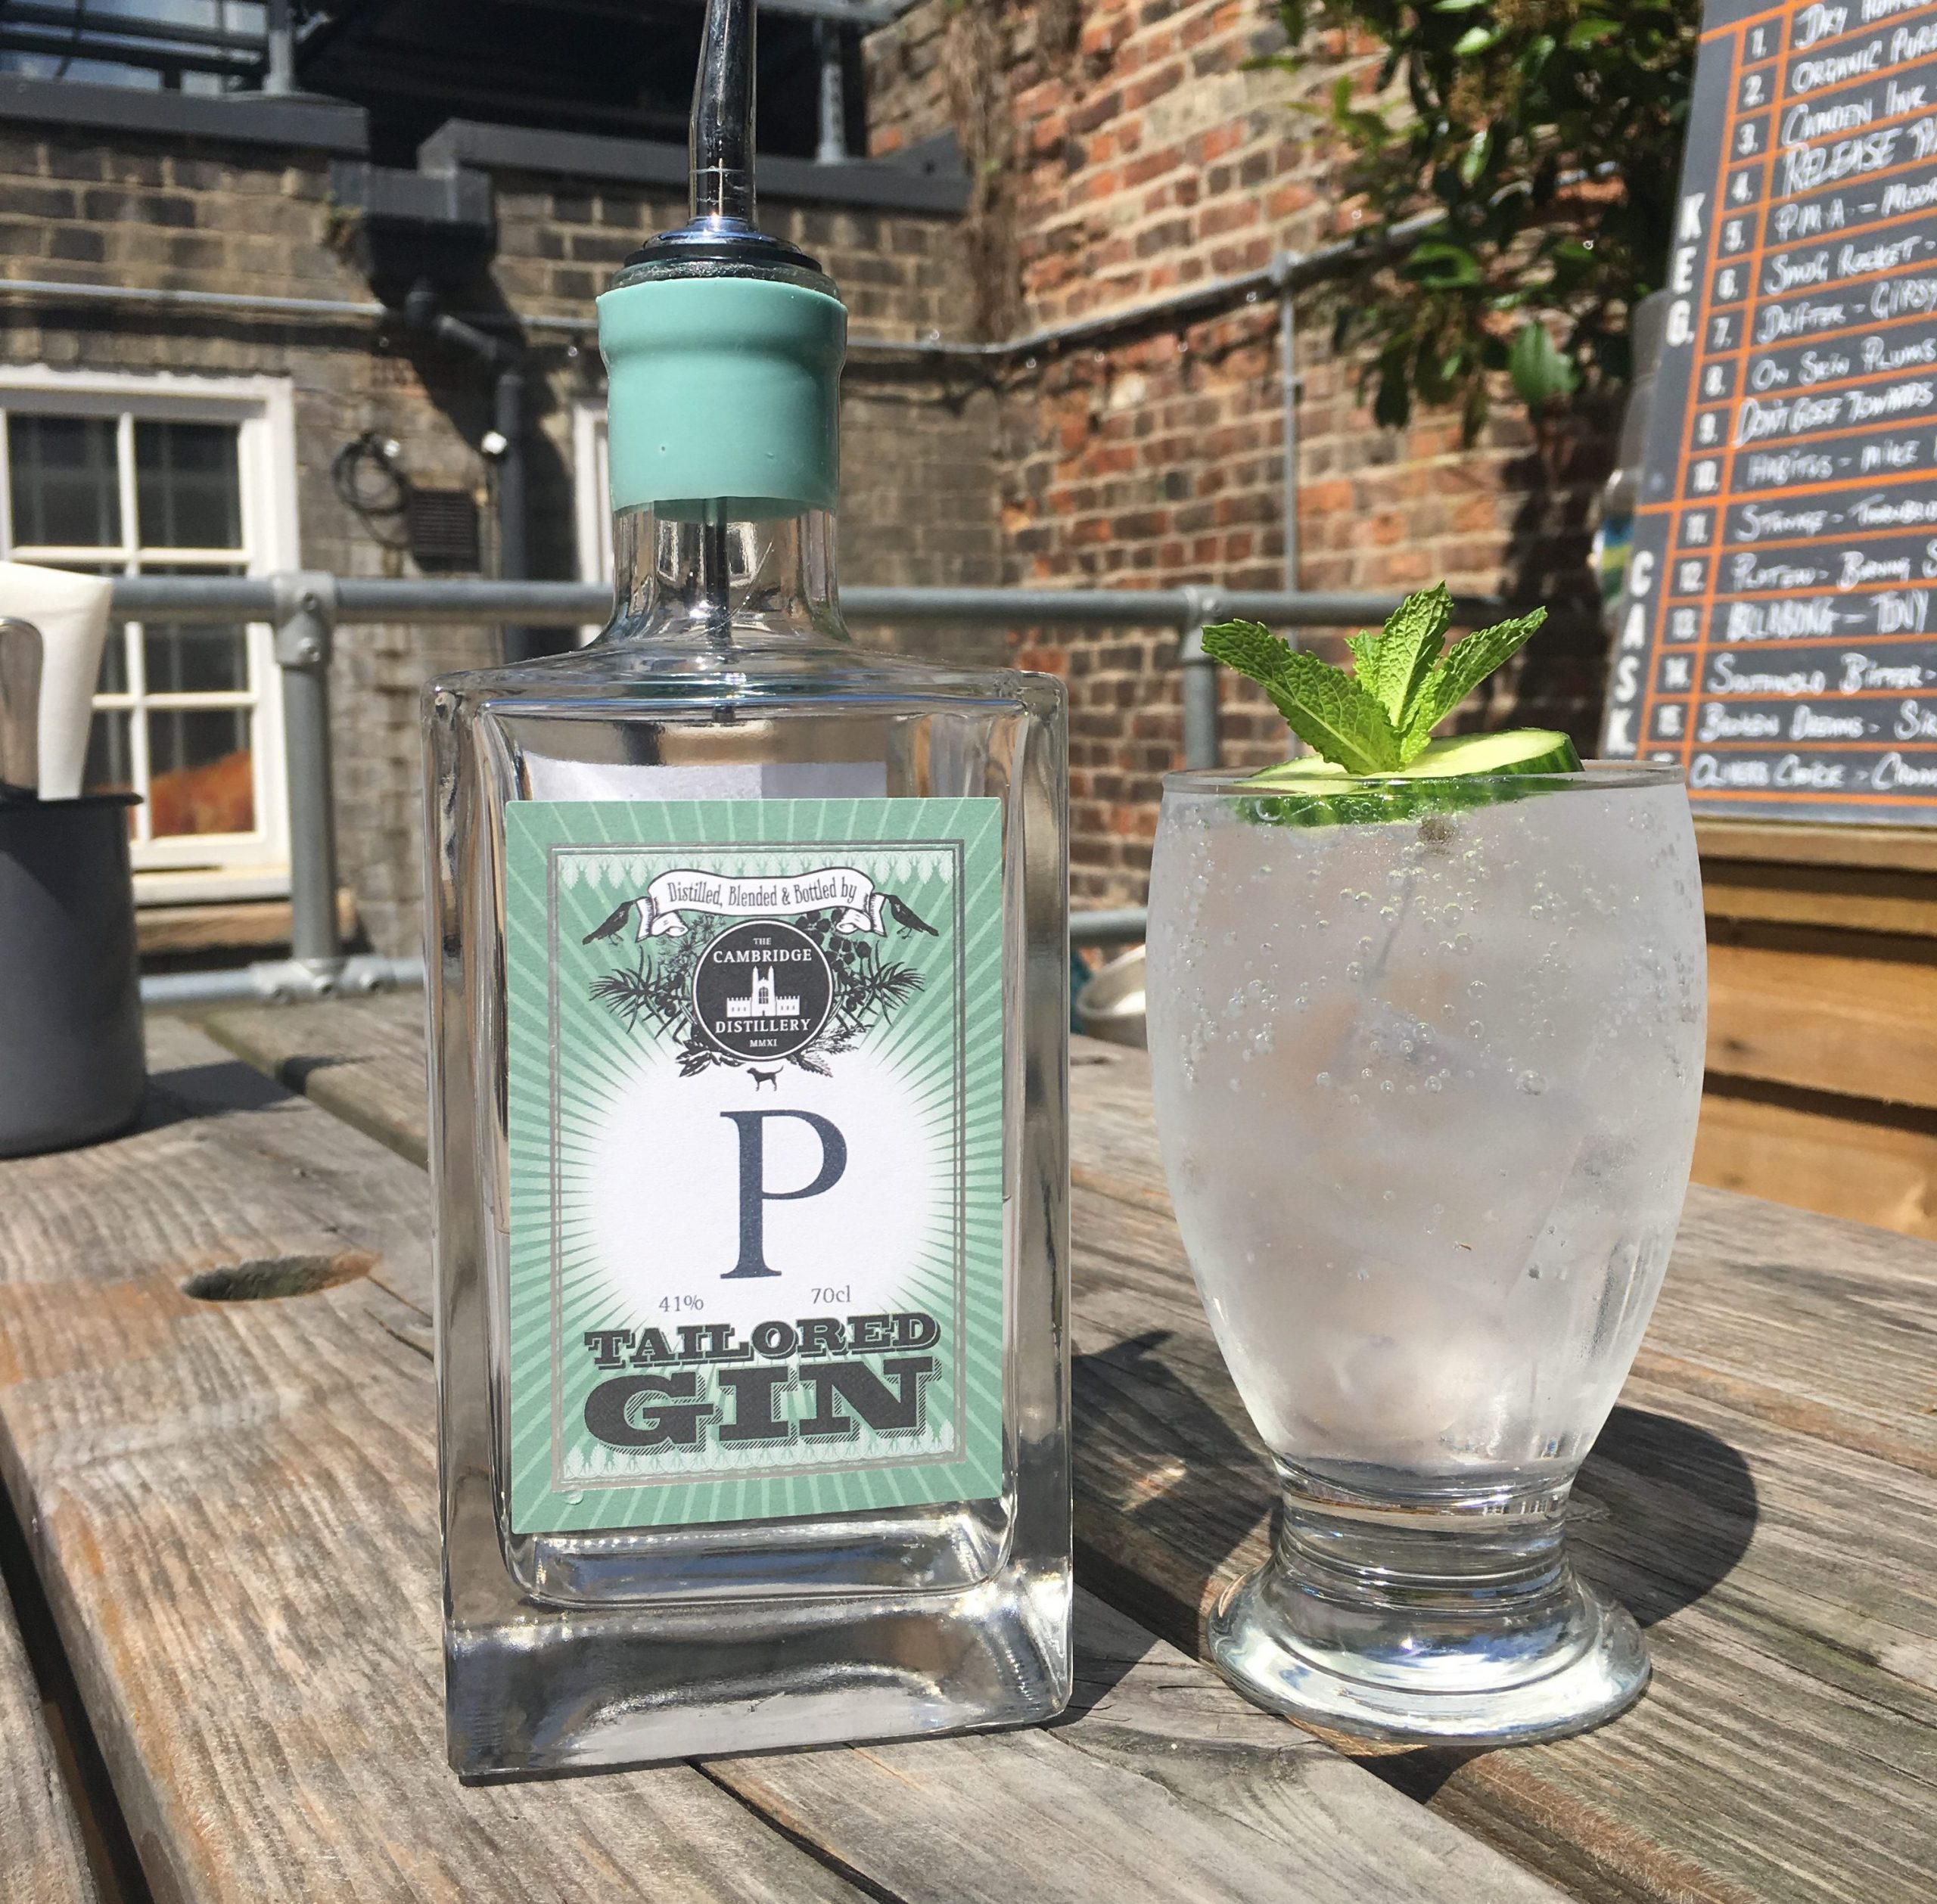 Gin made from peas?